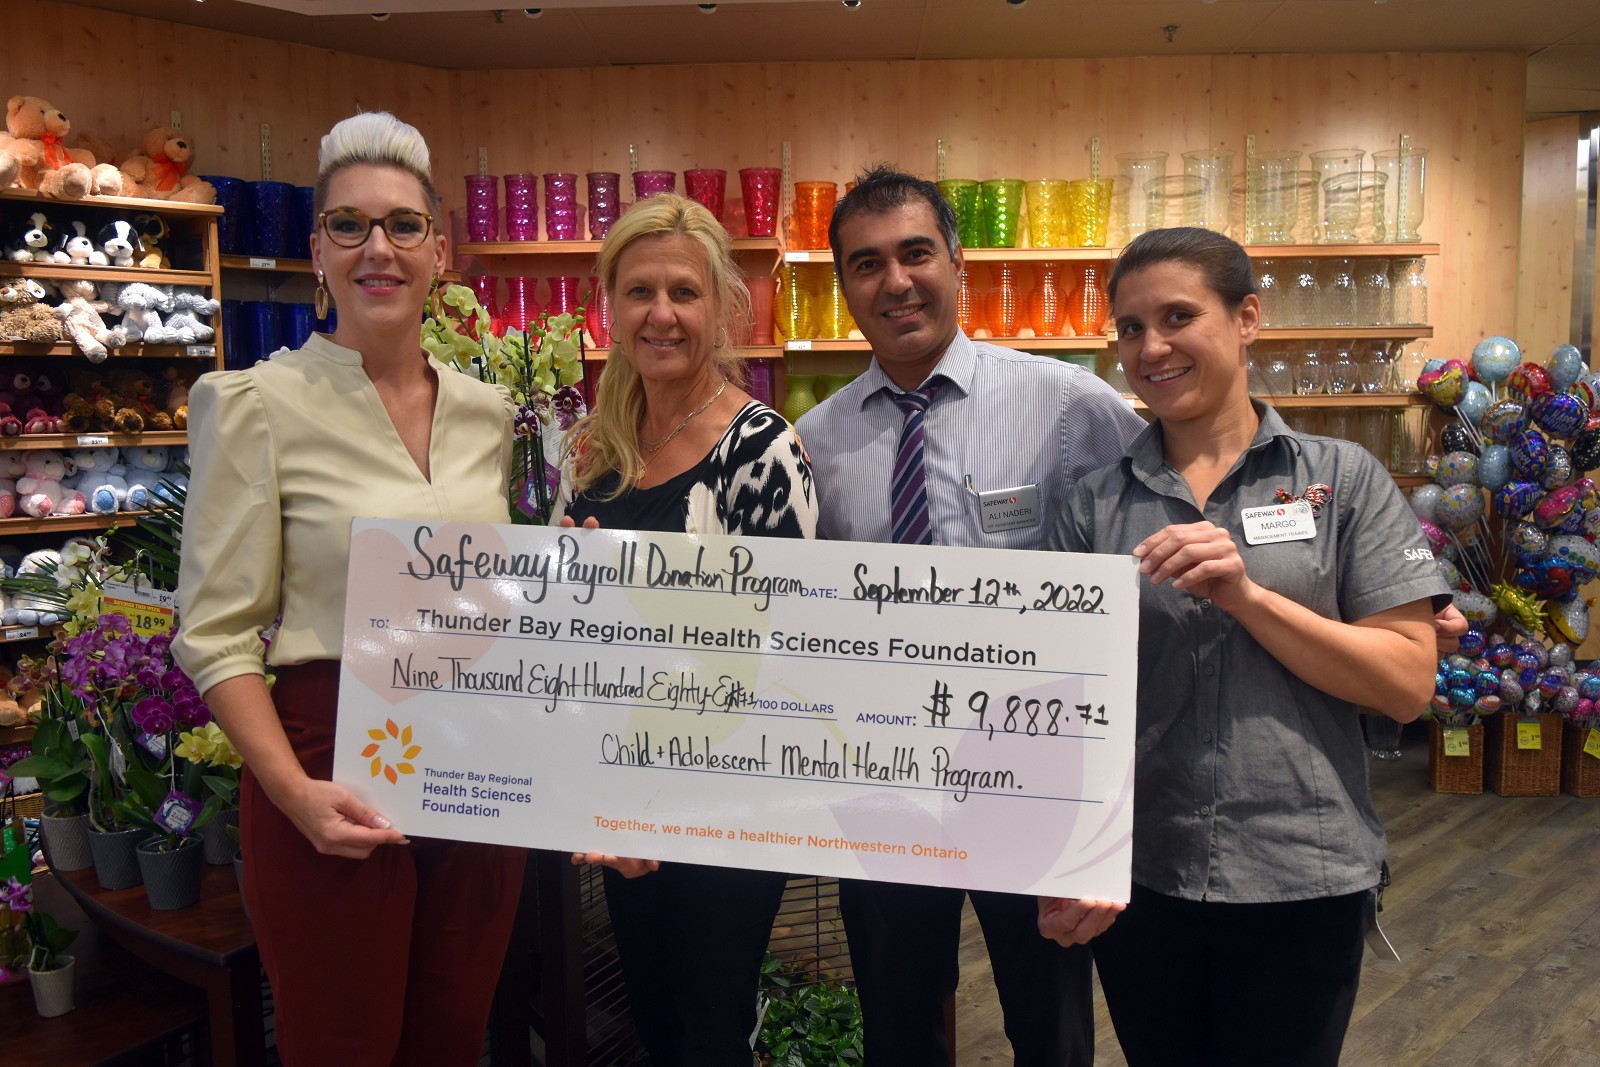 Safeway Canada's Support for Local Mental Health Program 